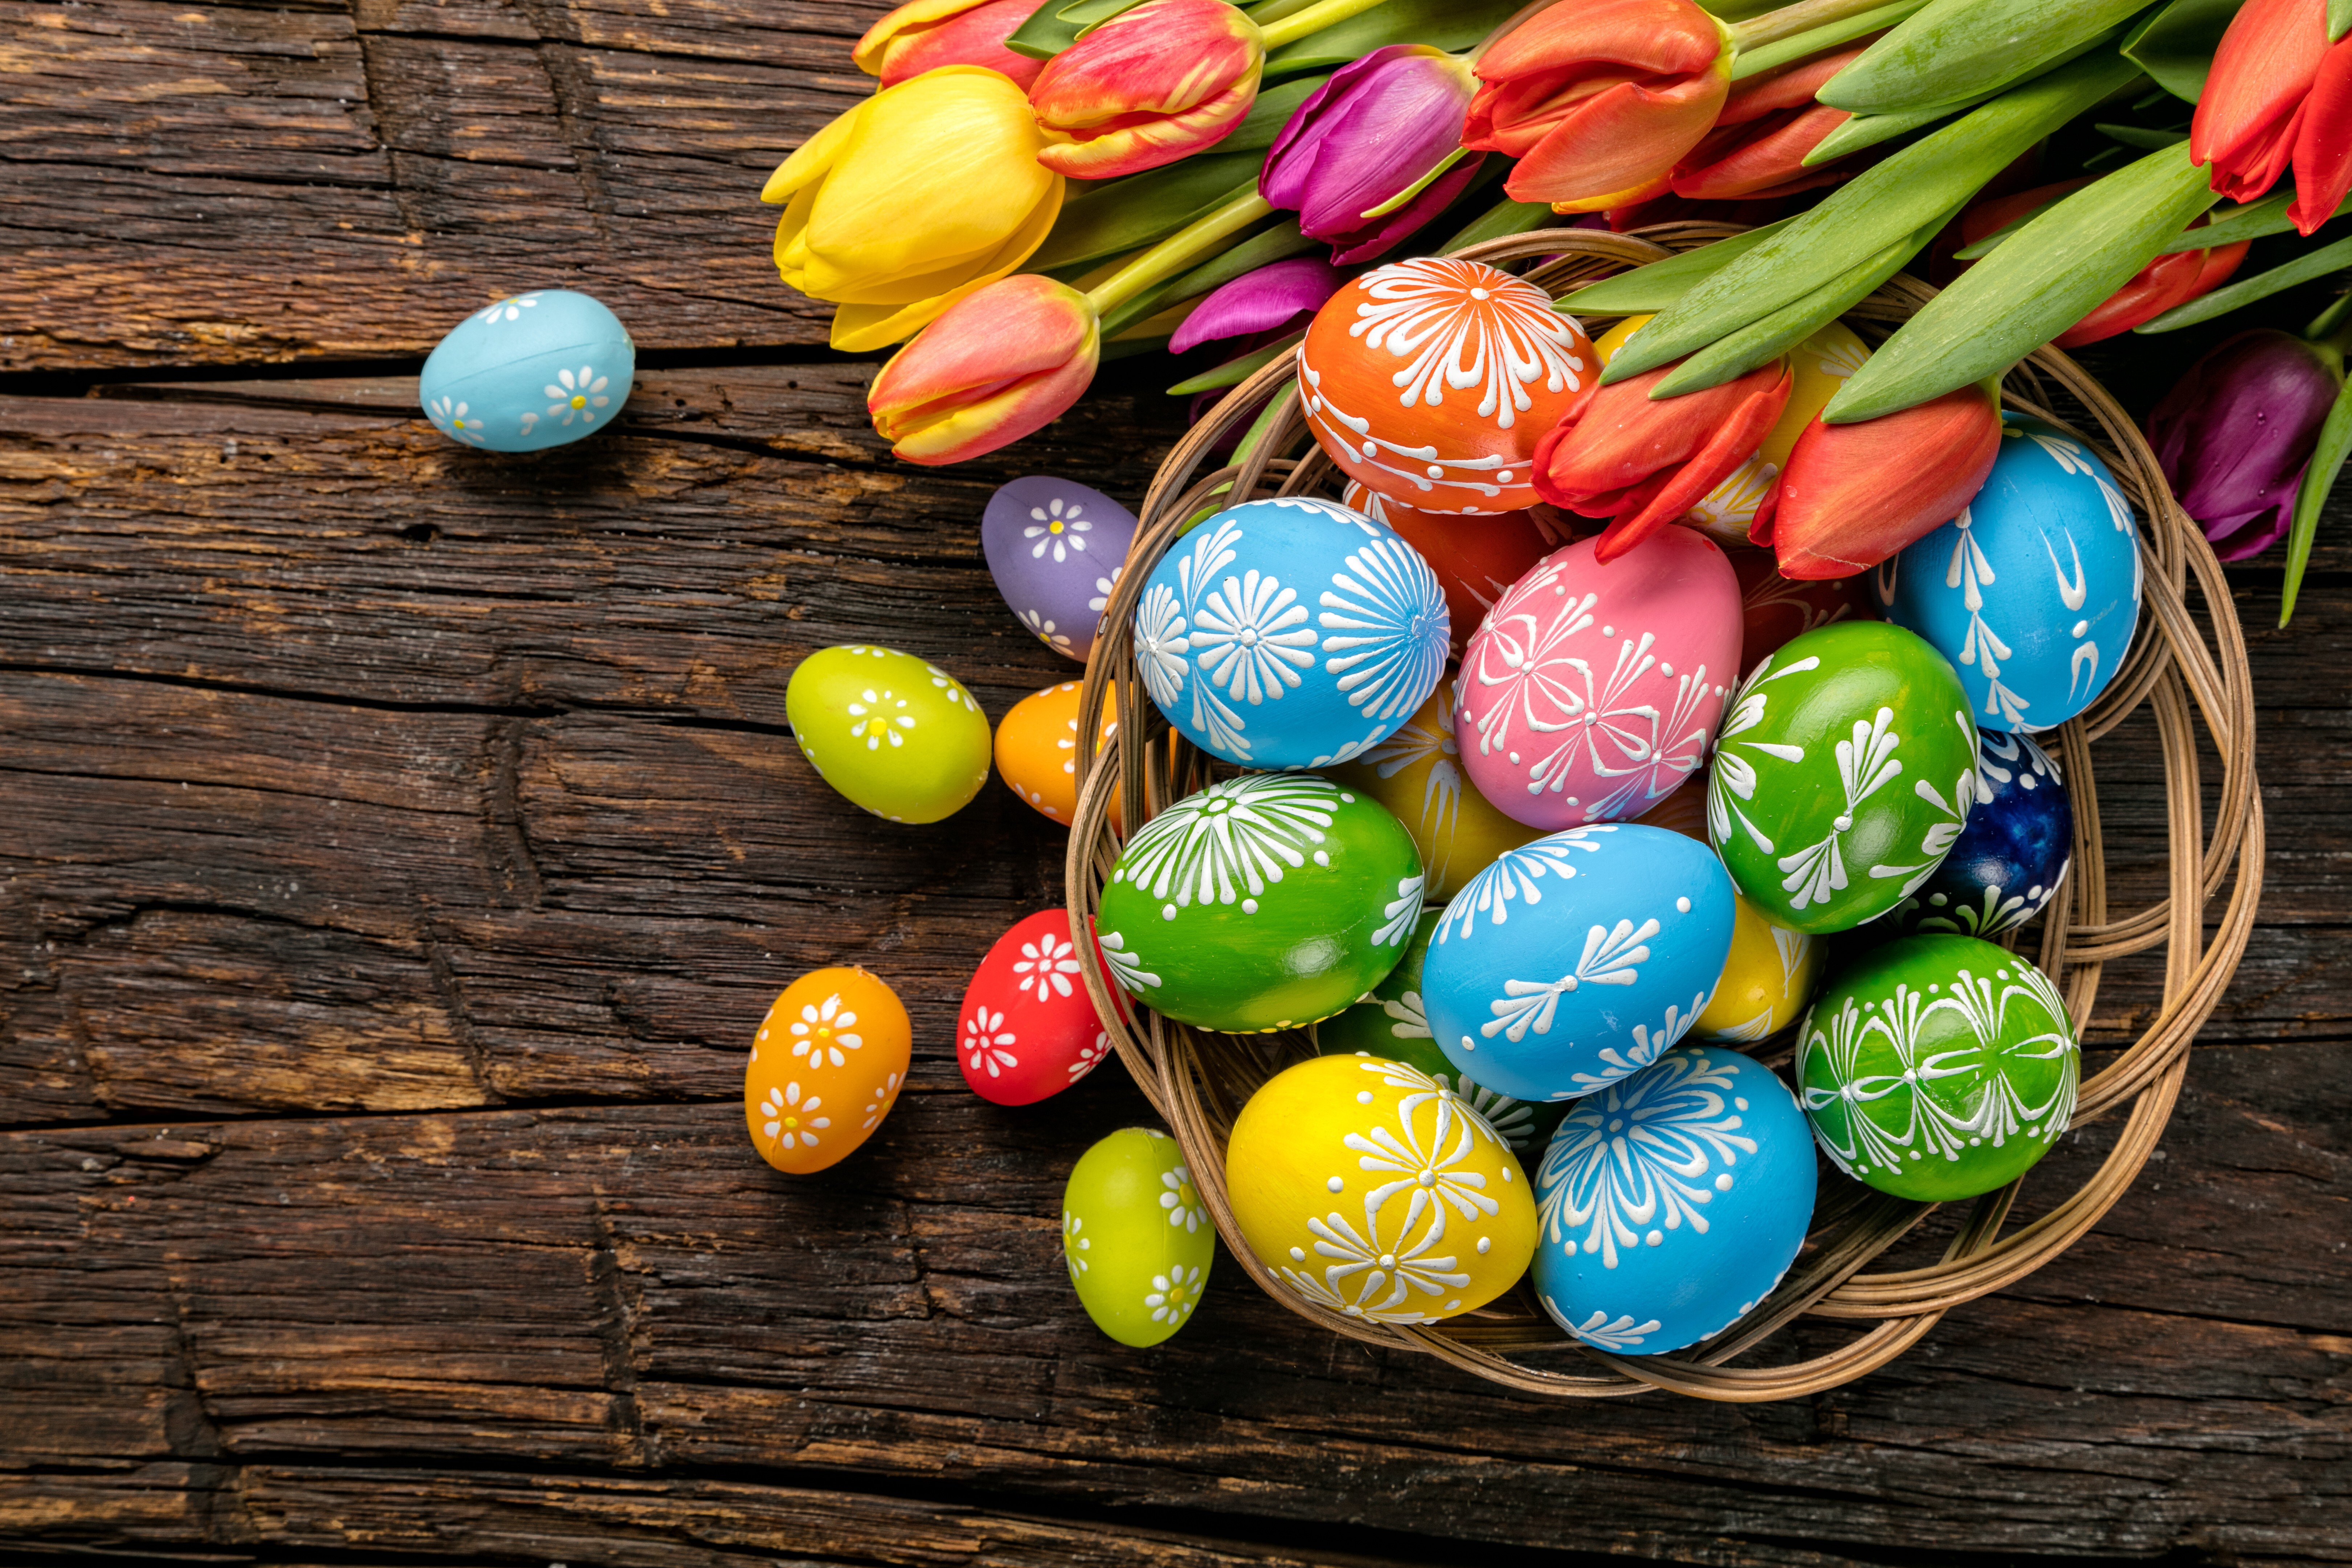 What's the story behind Easter eggs?